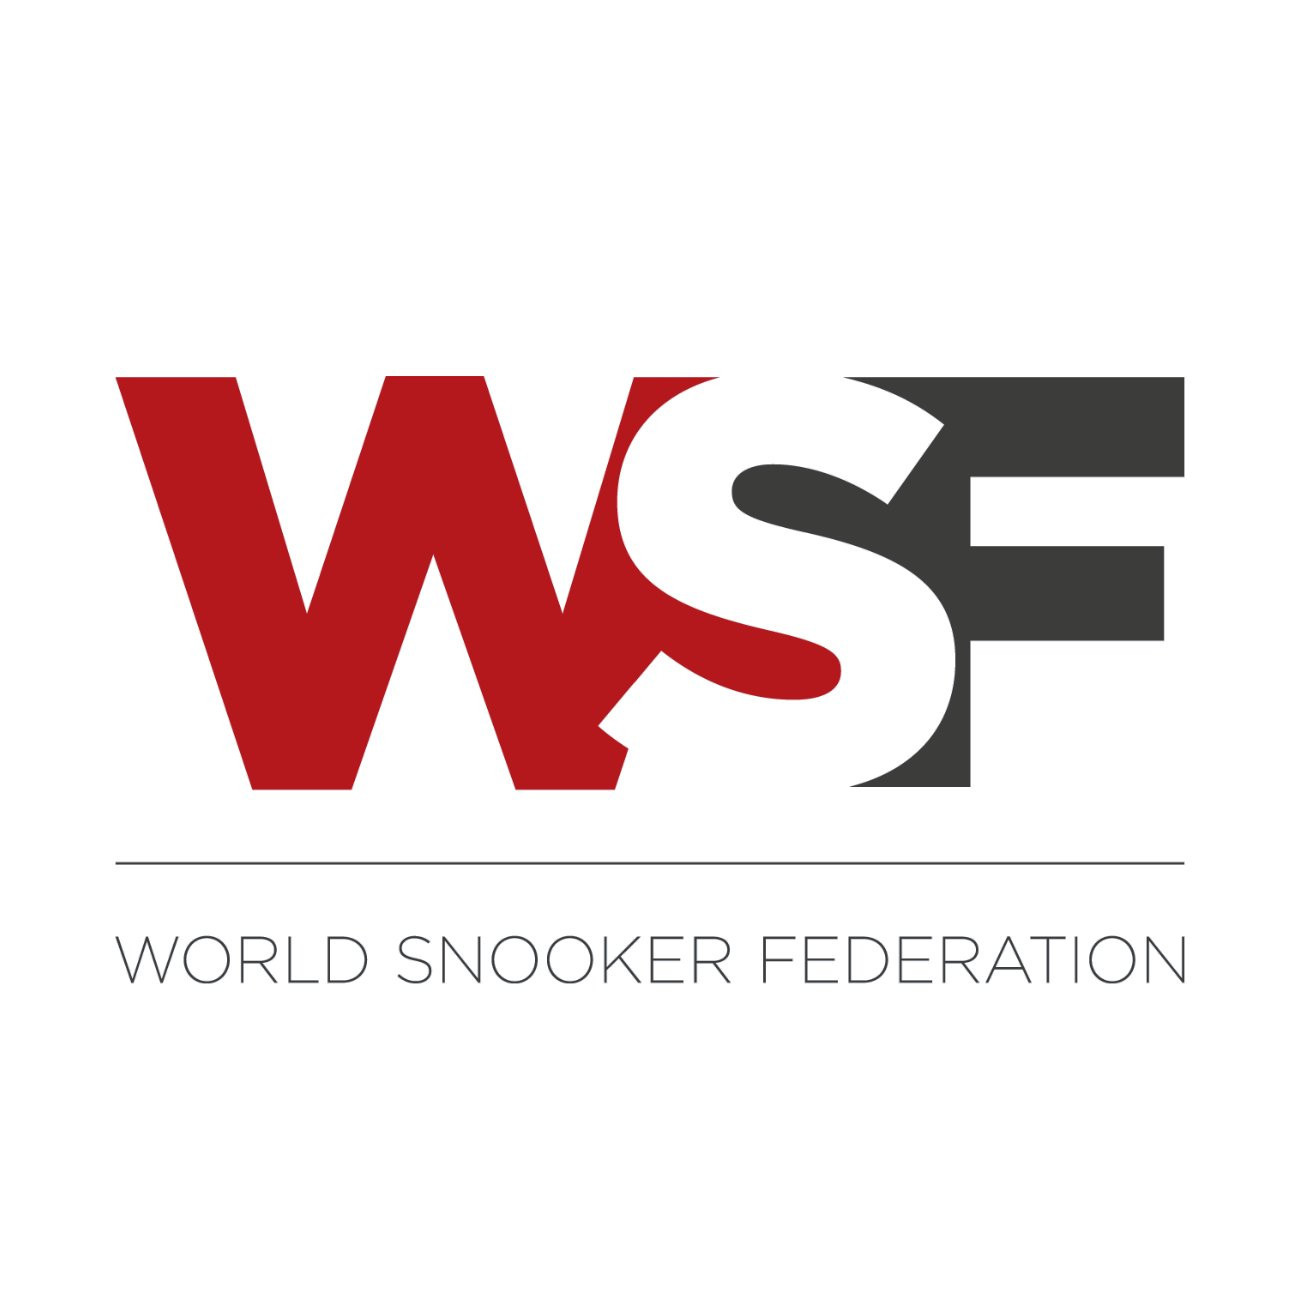 Russia newest member of World Snooker Federation 